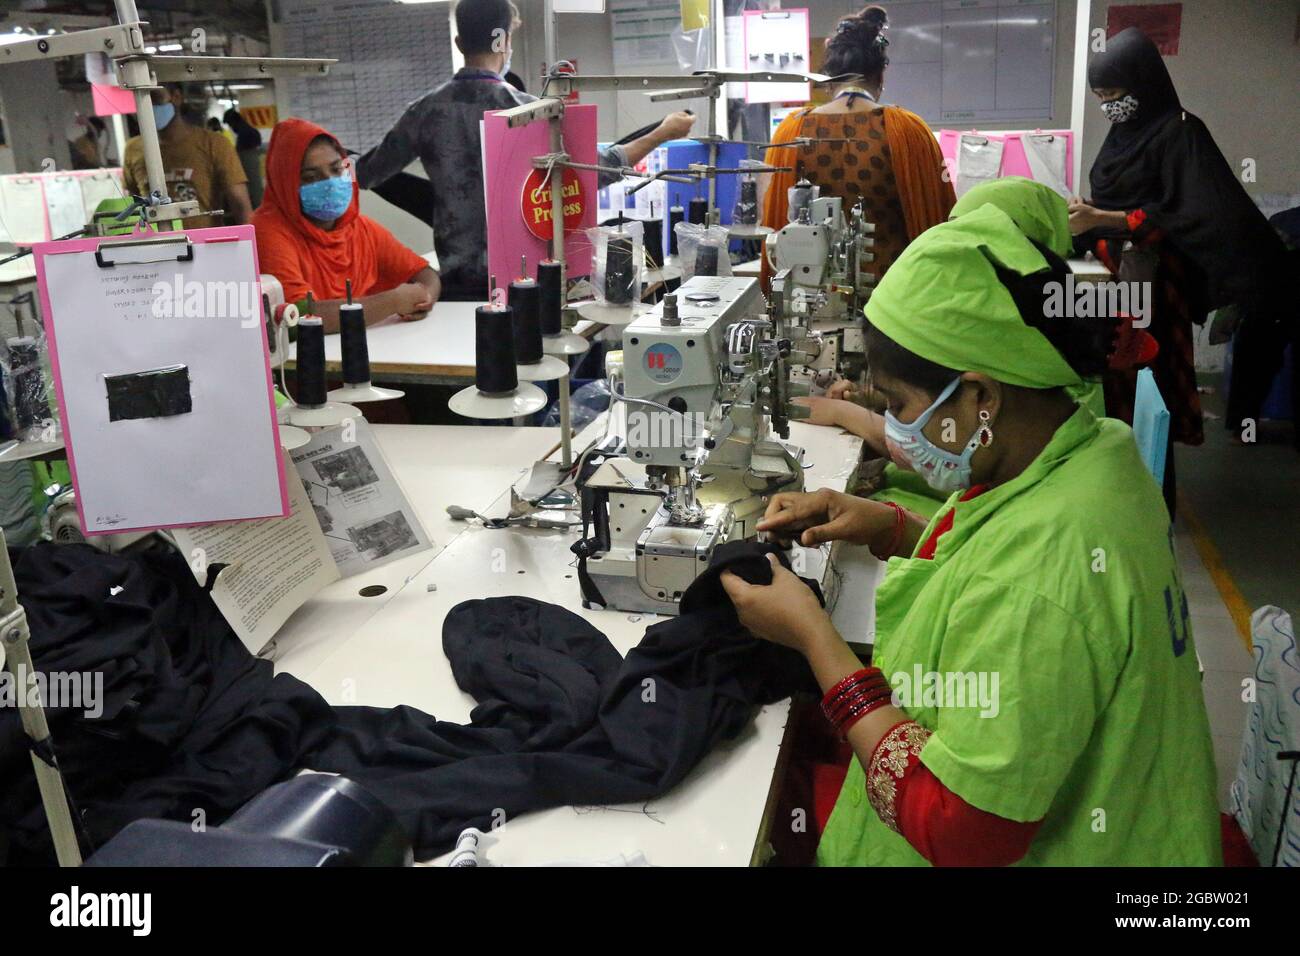 Dhaka, Bangladesh. 04th Aug, 2021. Dhaka, Bangladesh, August 4, 2021: A woman wears face mask as new safety protocol, while manufactures clothes, after authorities have allowed the resumption of activities after a new outbreak of Covid-19. Despite reaching the highest peak of positive cases, Factories resumed the production of clothes to avoid more unemployment . Credit: Habibur Rahman/Eyepix Group/Alamy Live News Credit: Eyepix Group/Alamy Live News Stock Photo